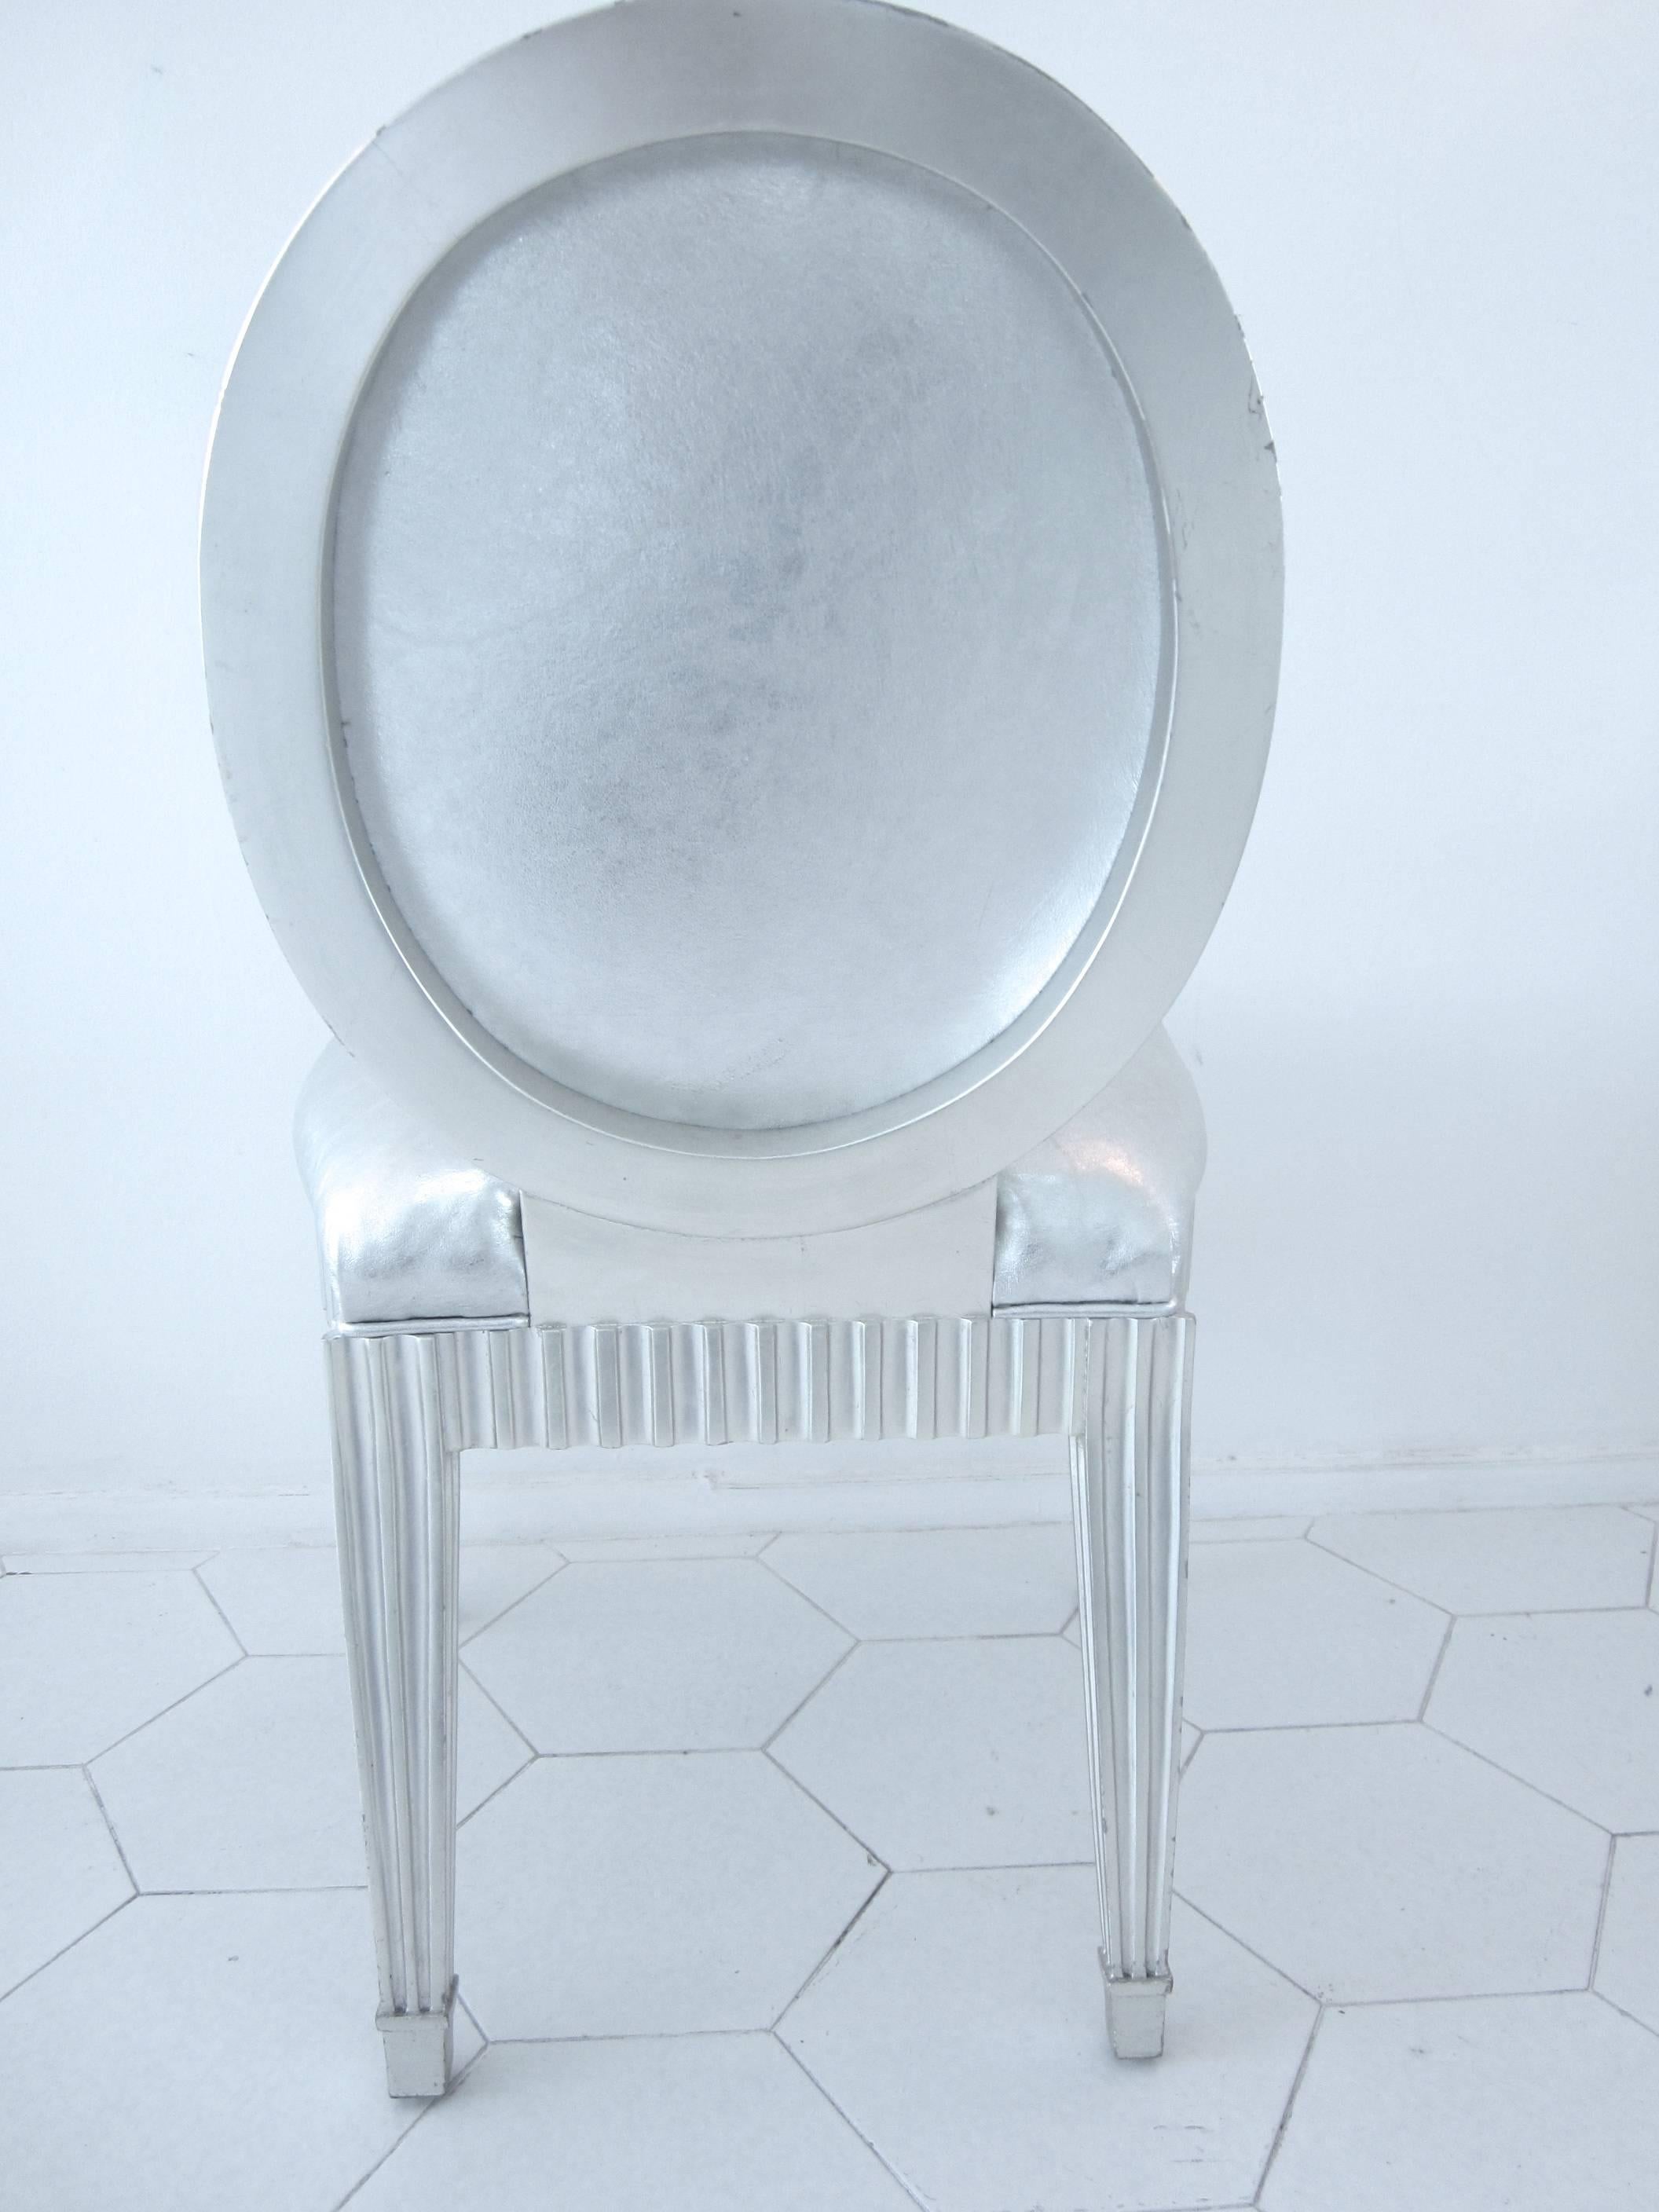 Neoclassic Silver Leaf and Silver Leather Chairs by John Hutton for Donghia, Pr. In Good Condition For Sale In Miami, FL